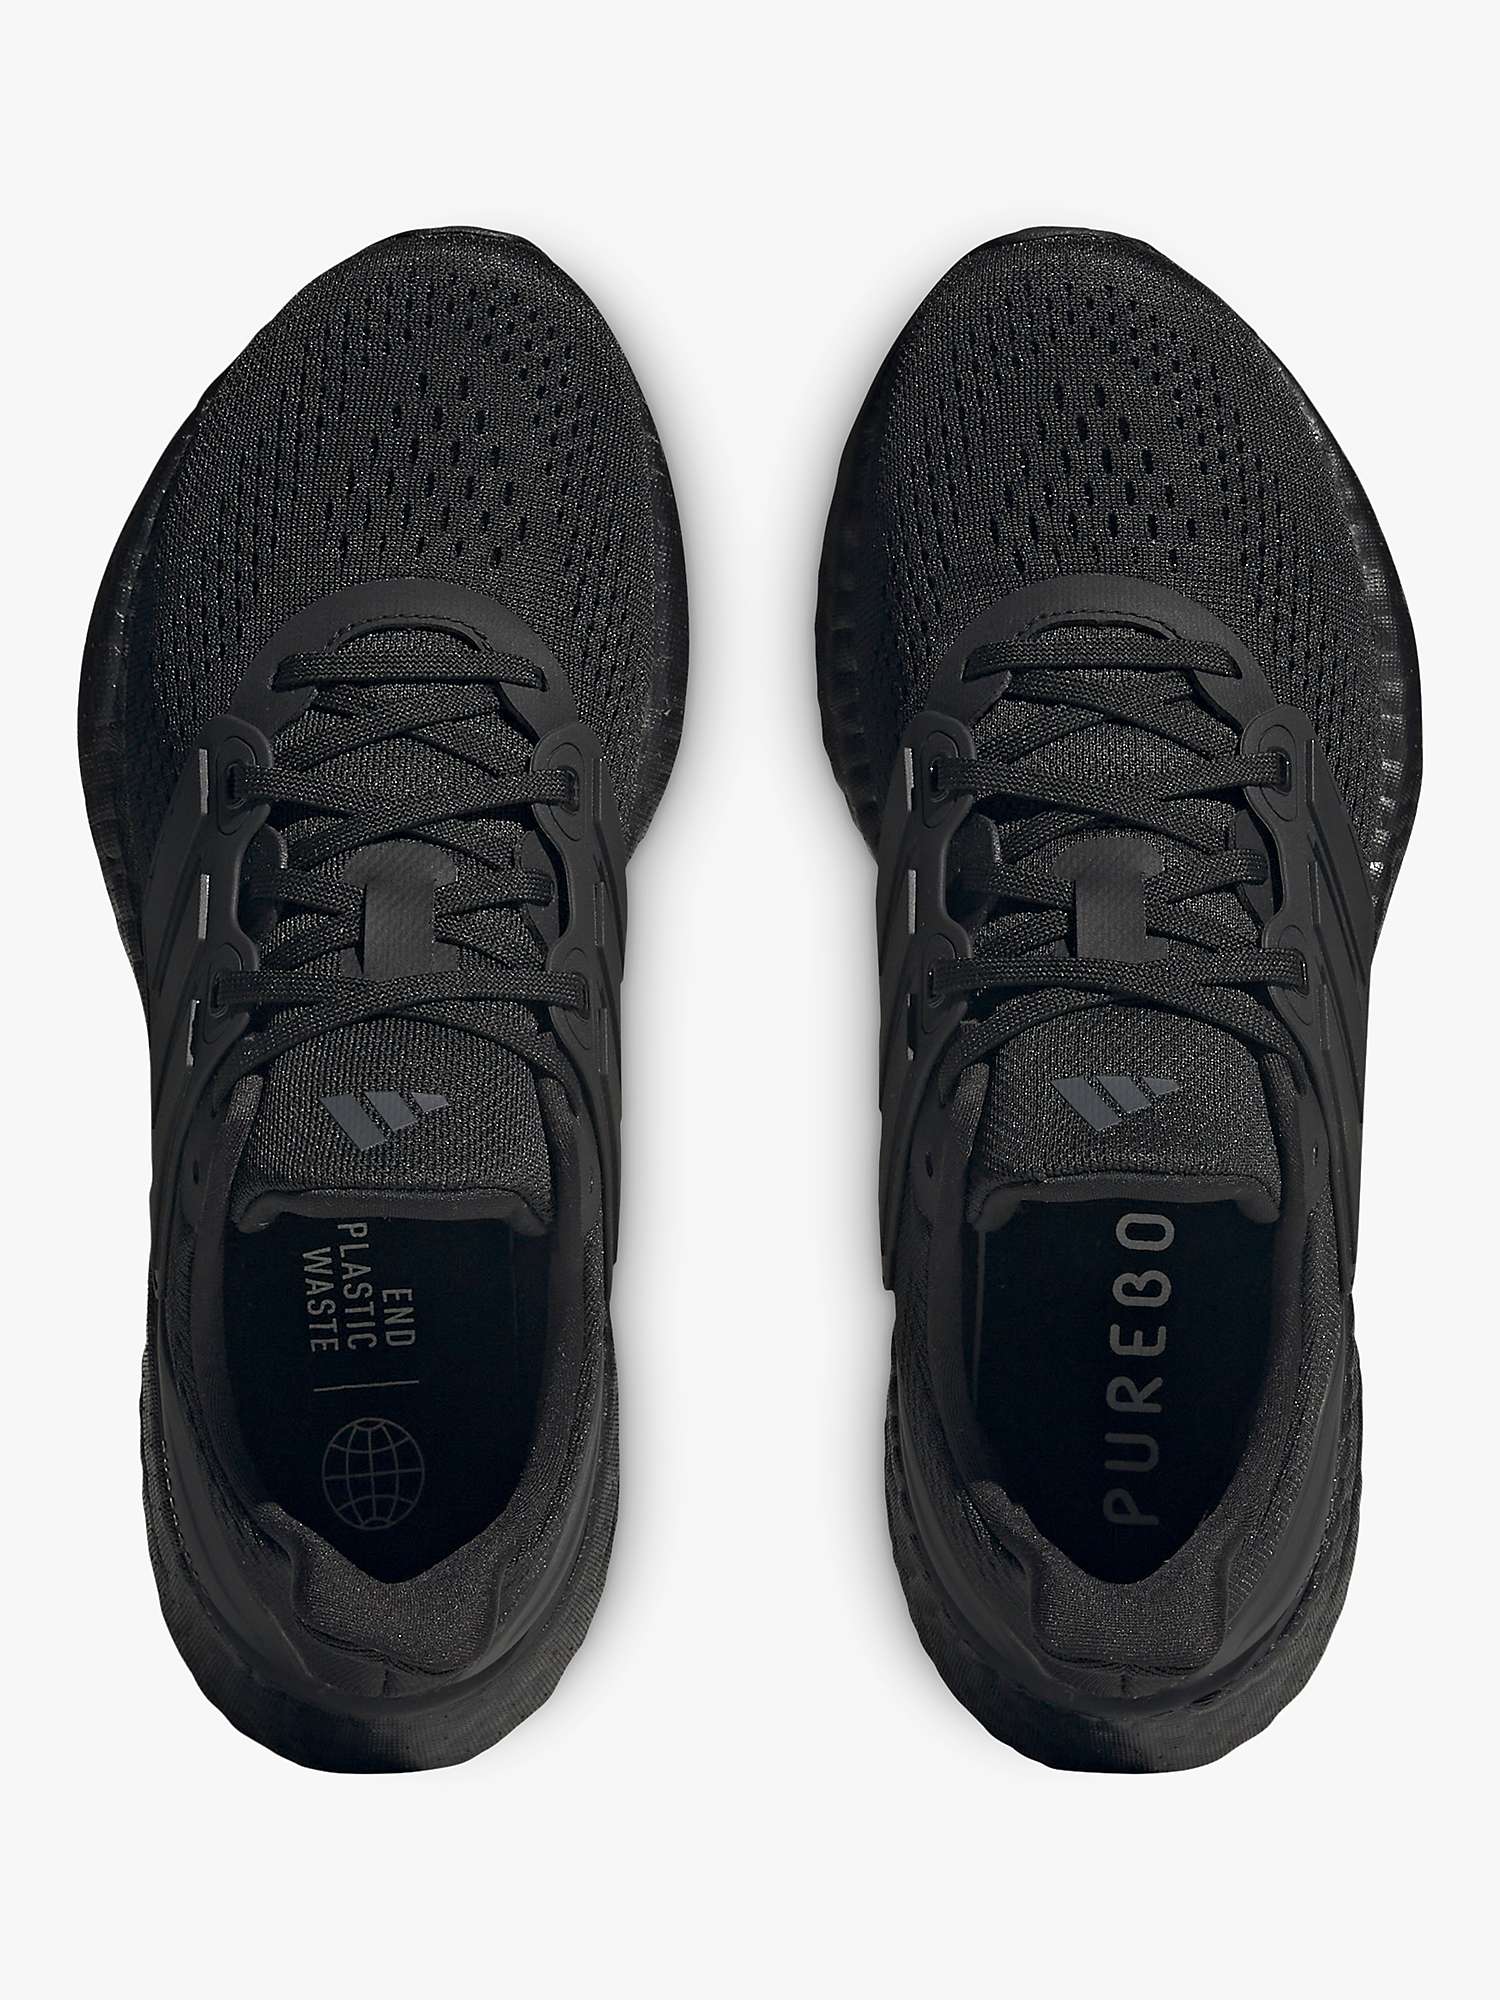 Buy adidas Pureboost 23 Running Shoes Online at johnlewis.com